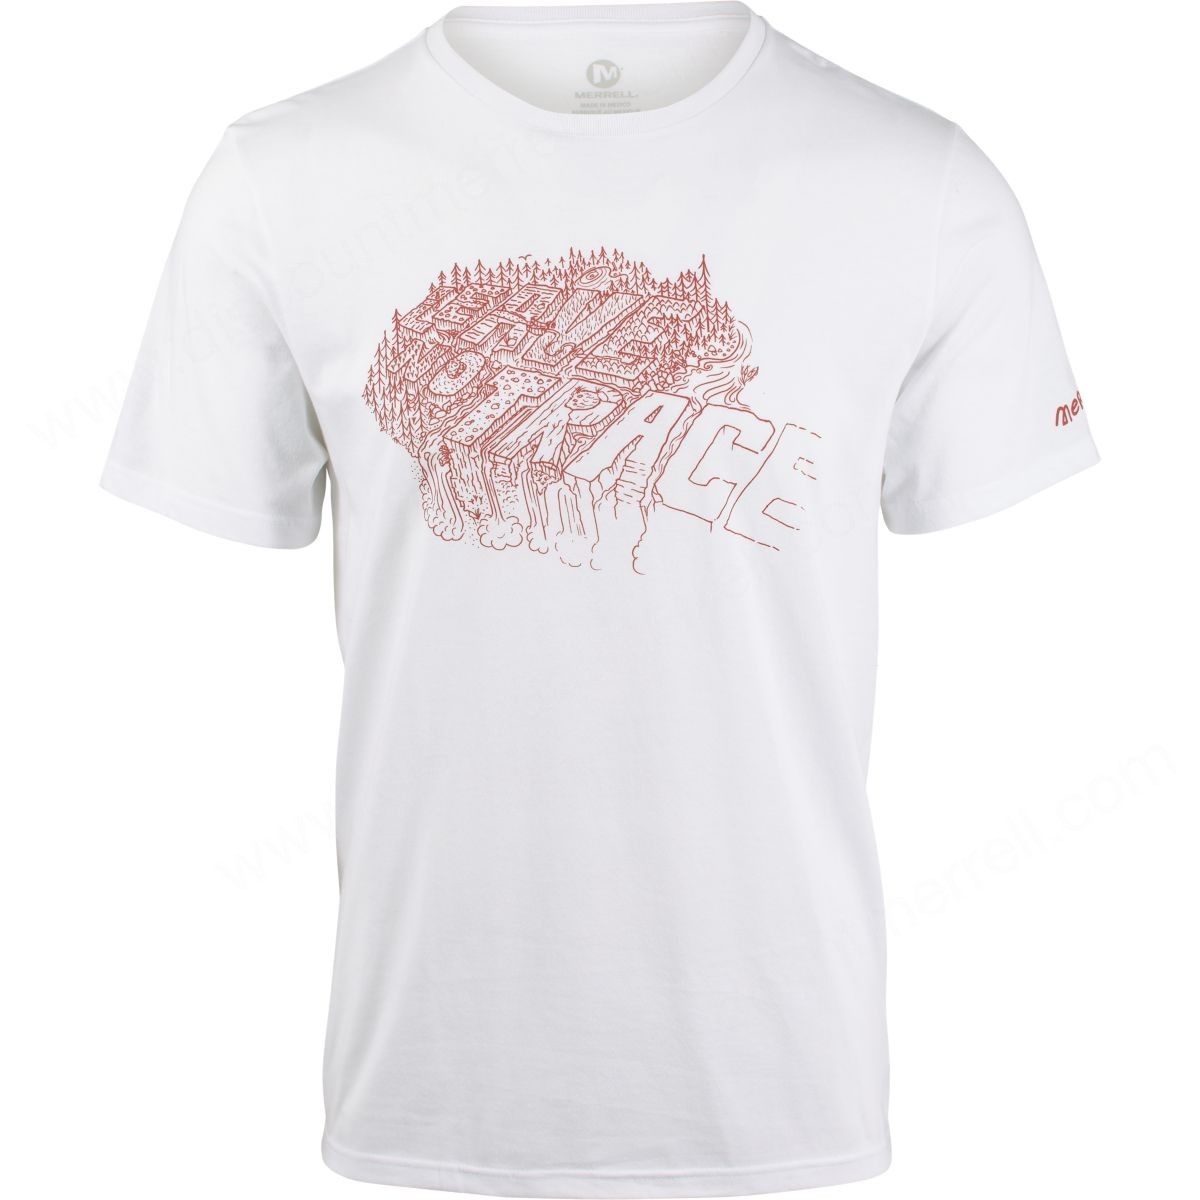 Merrell Mens's Leave No Trace Graphic Tshirts White - -0